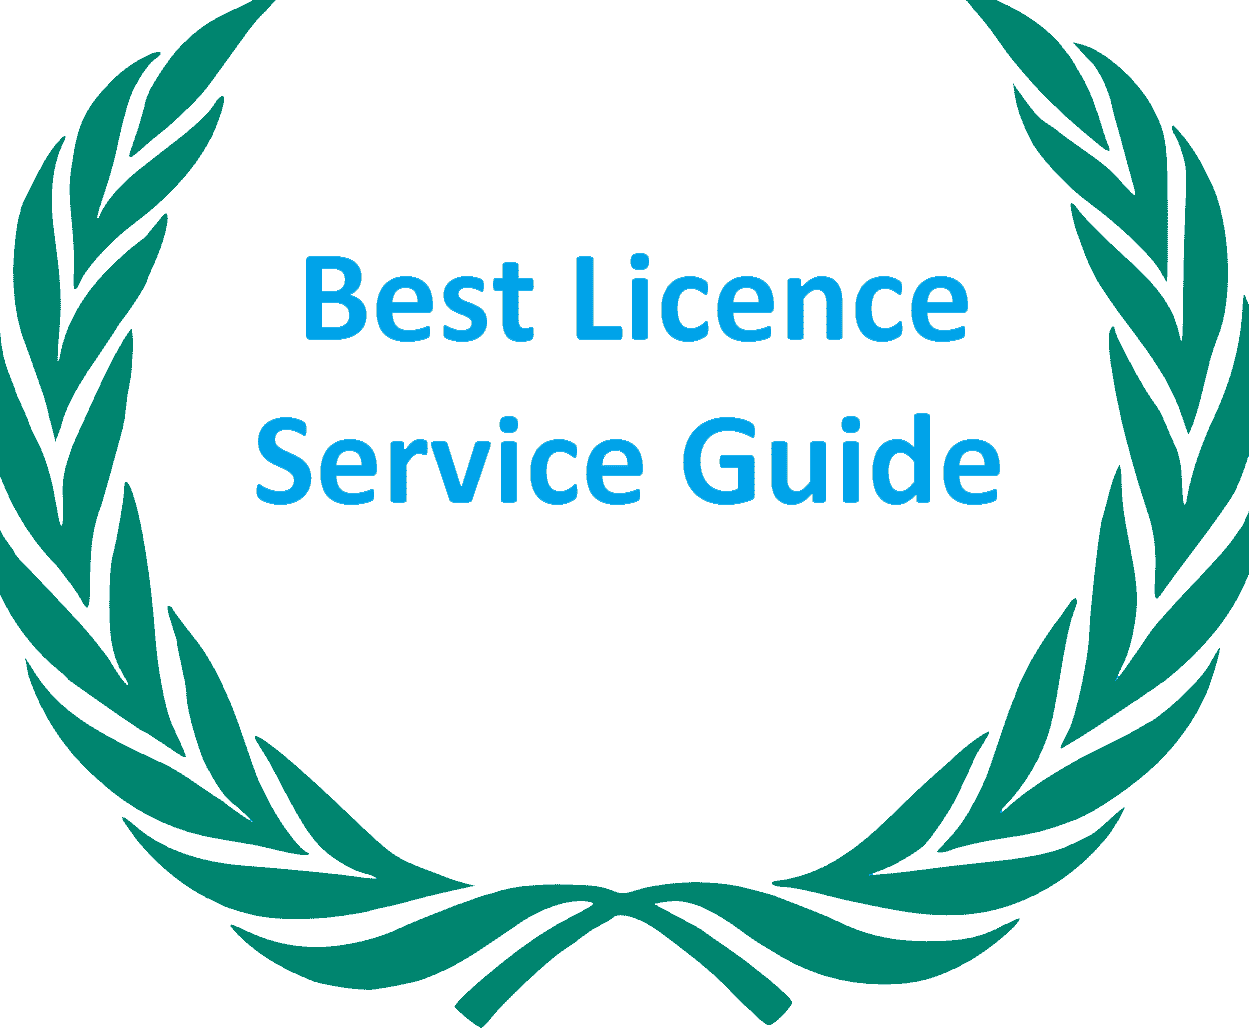 Best Licence Service Guide